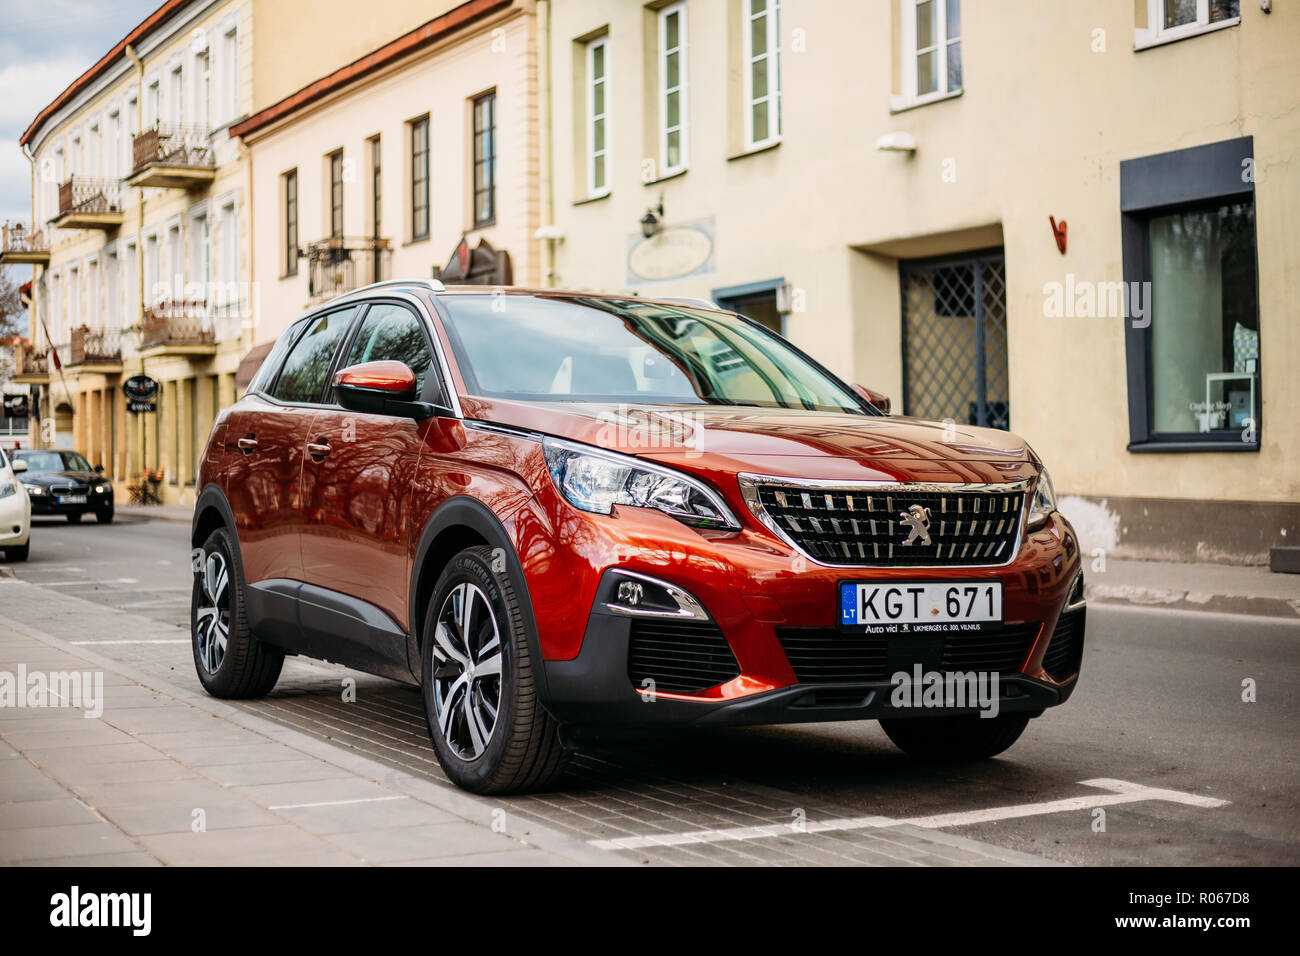 Vilnius, Lithuania - April 19, 2018: Peugeot 3008 Is A Compact Crossover Suv Manufactured By French Automaker Peugeot. Stock Photo